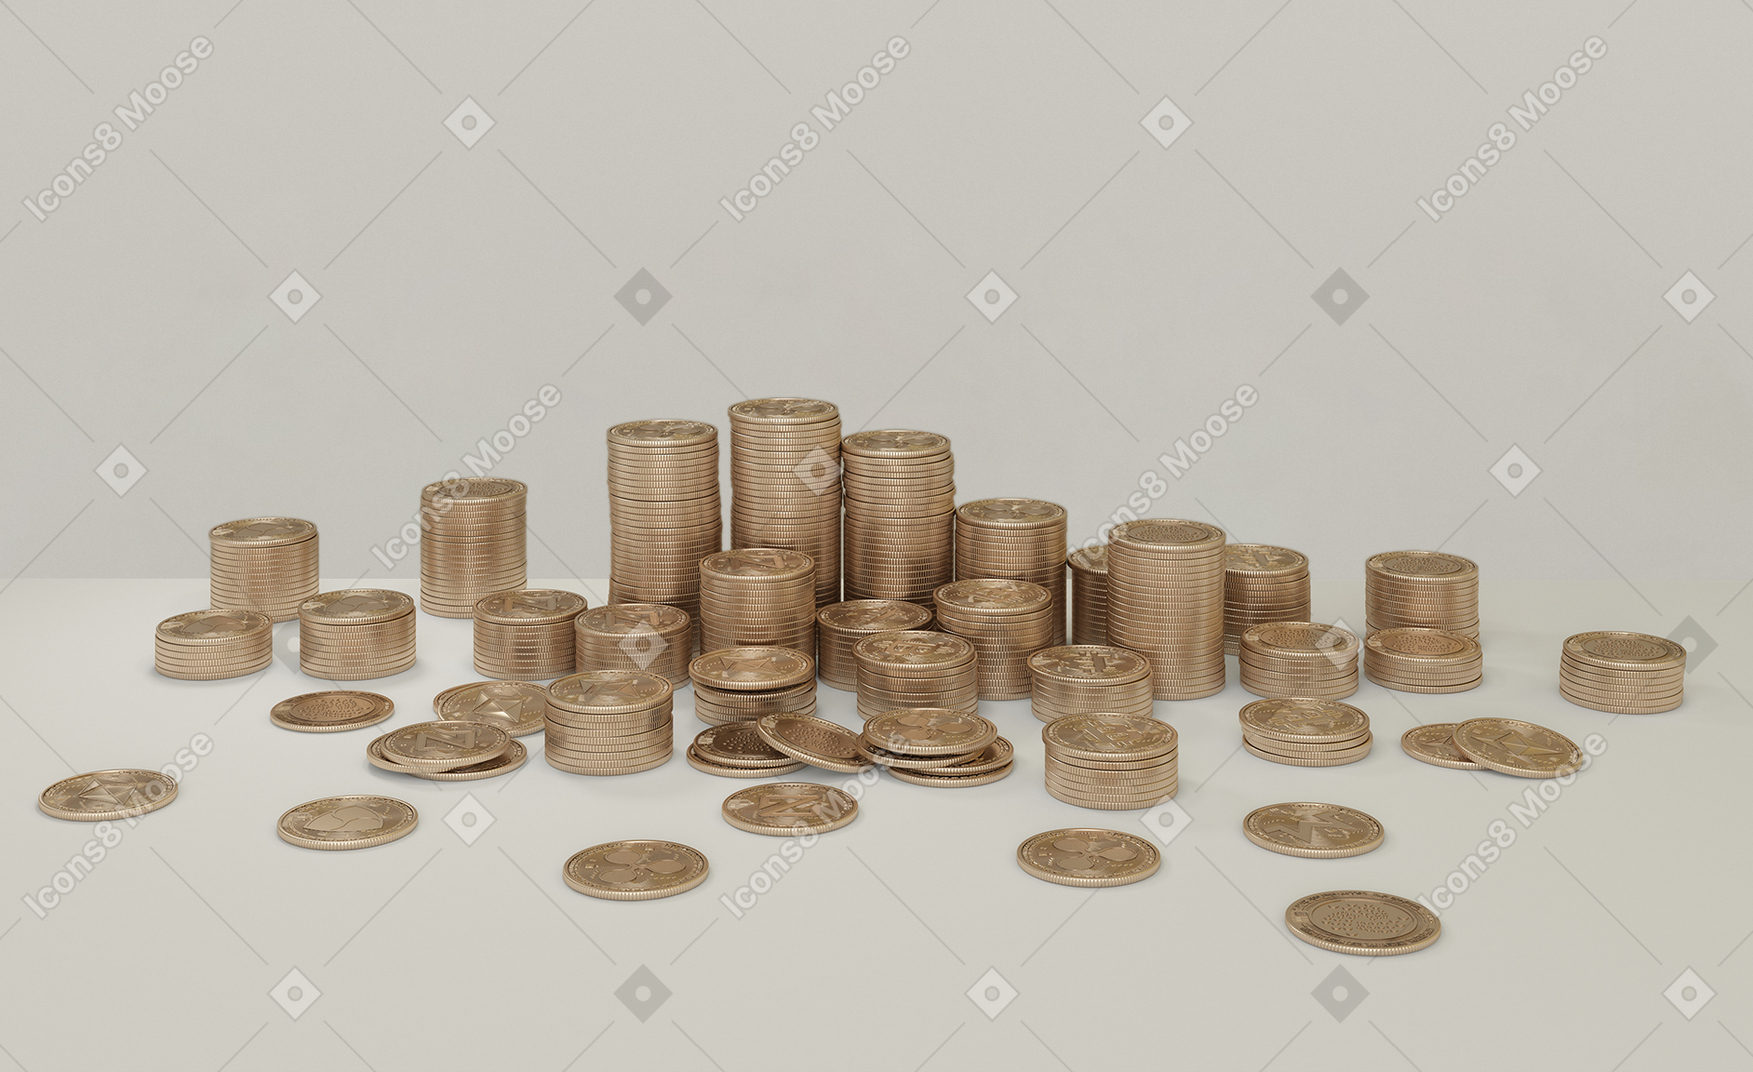 Stacks of crypto coins